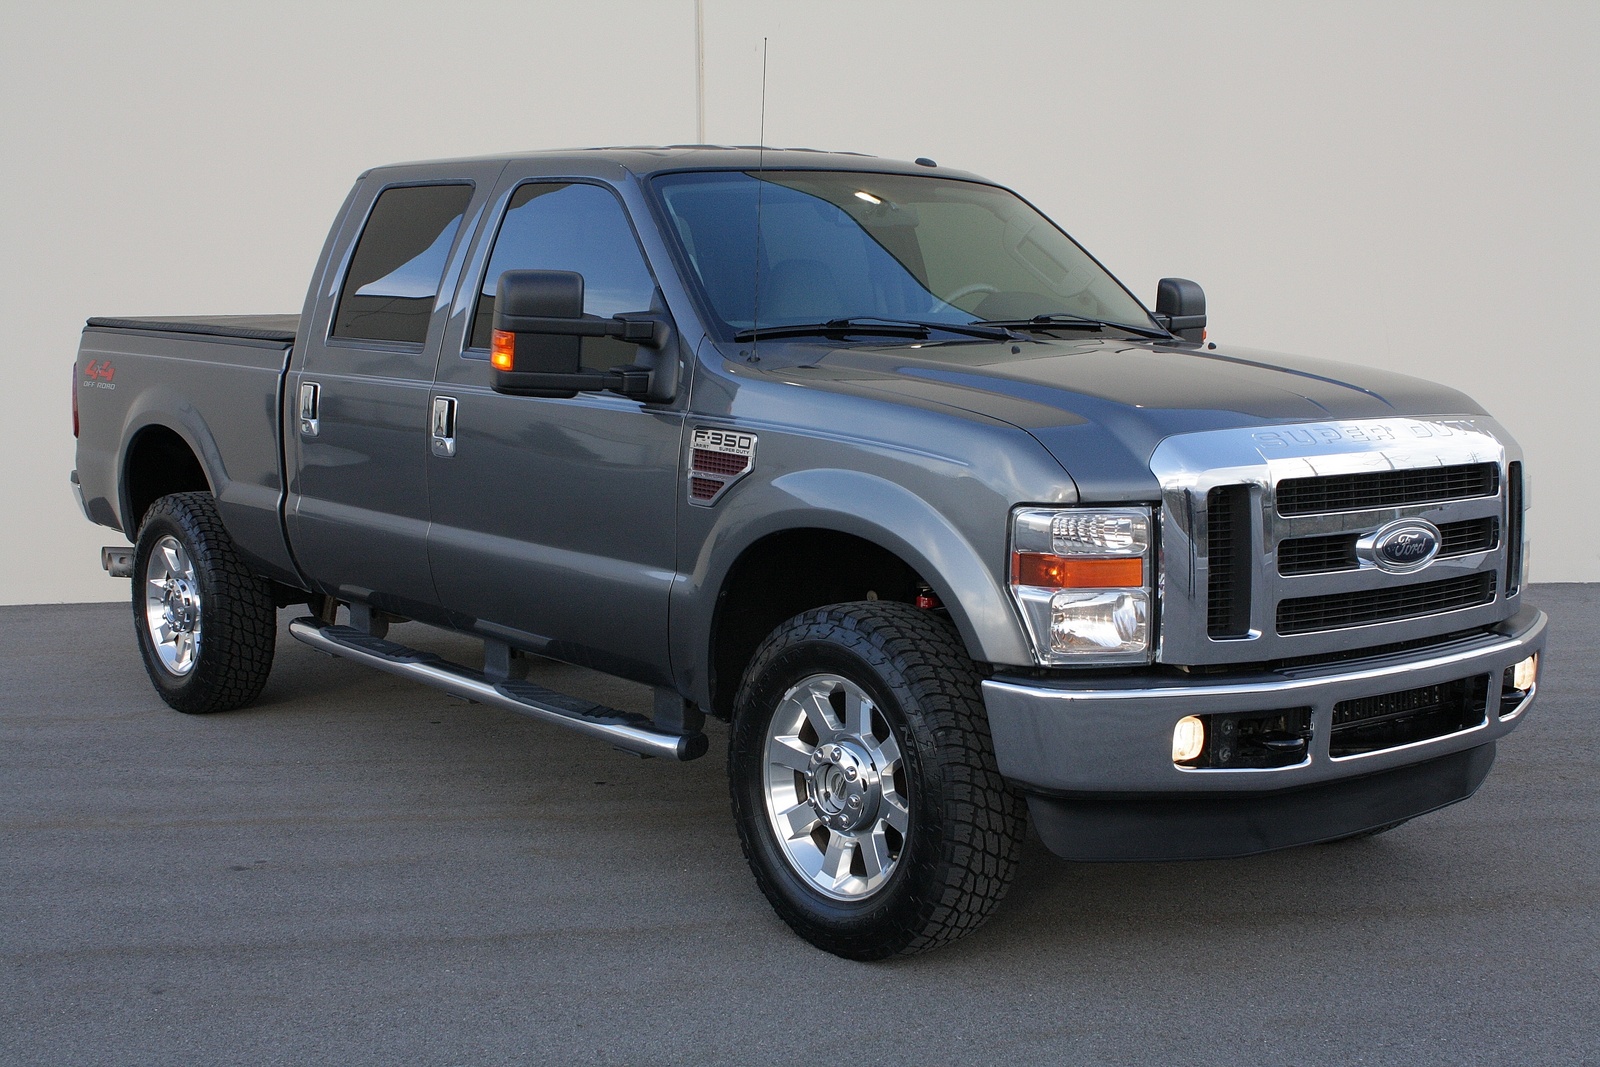 2009 Ford super duty specifications #1